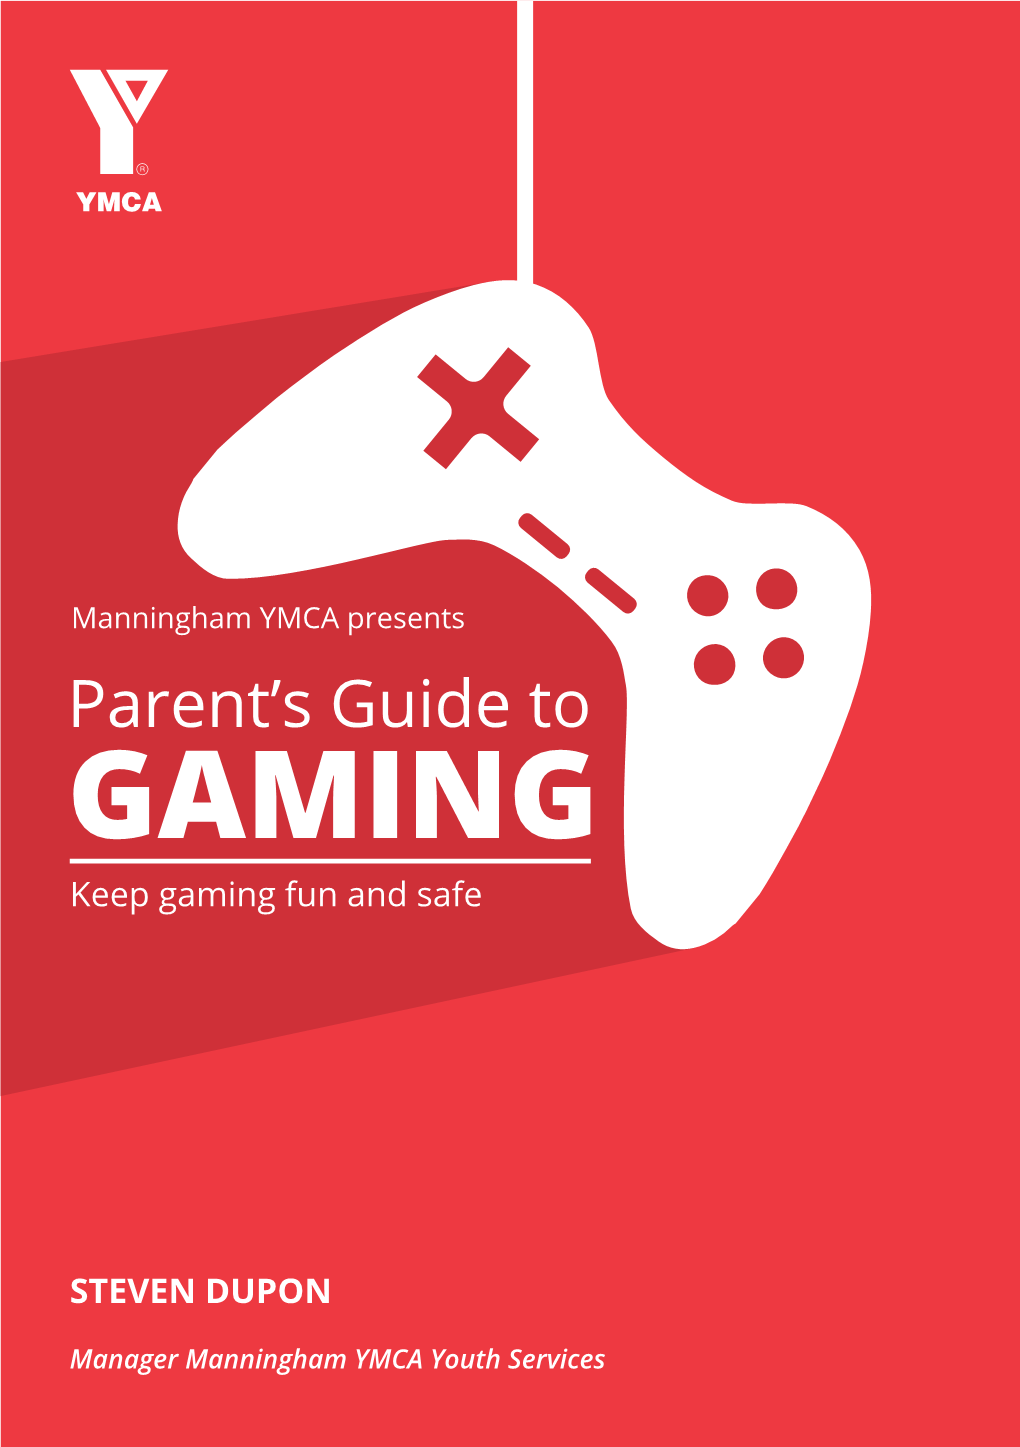 Parent's Guide to Gaming.Pdf